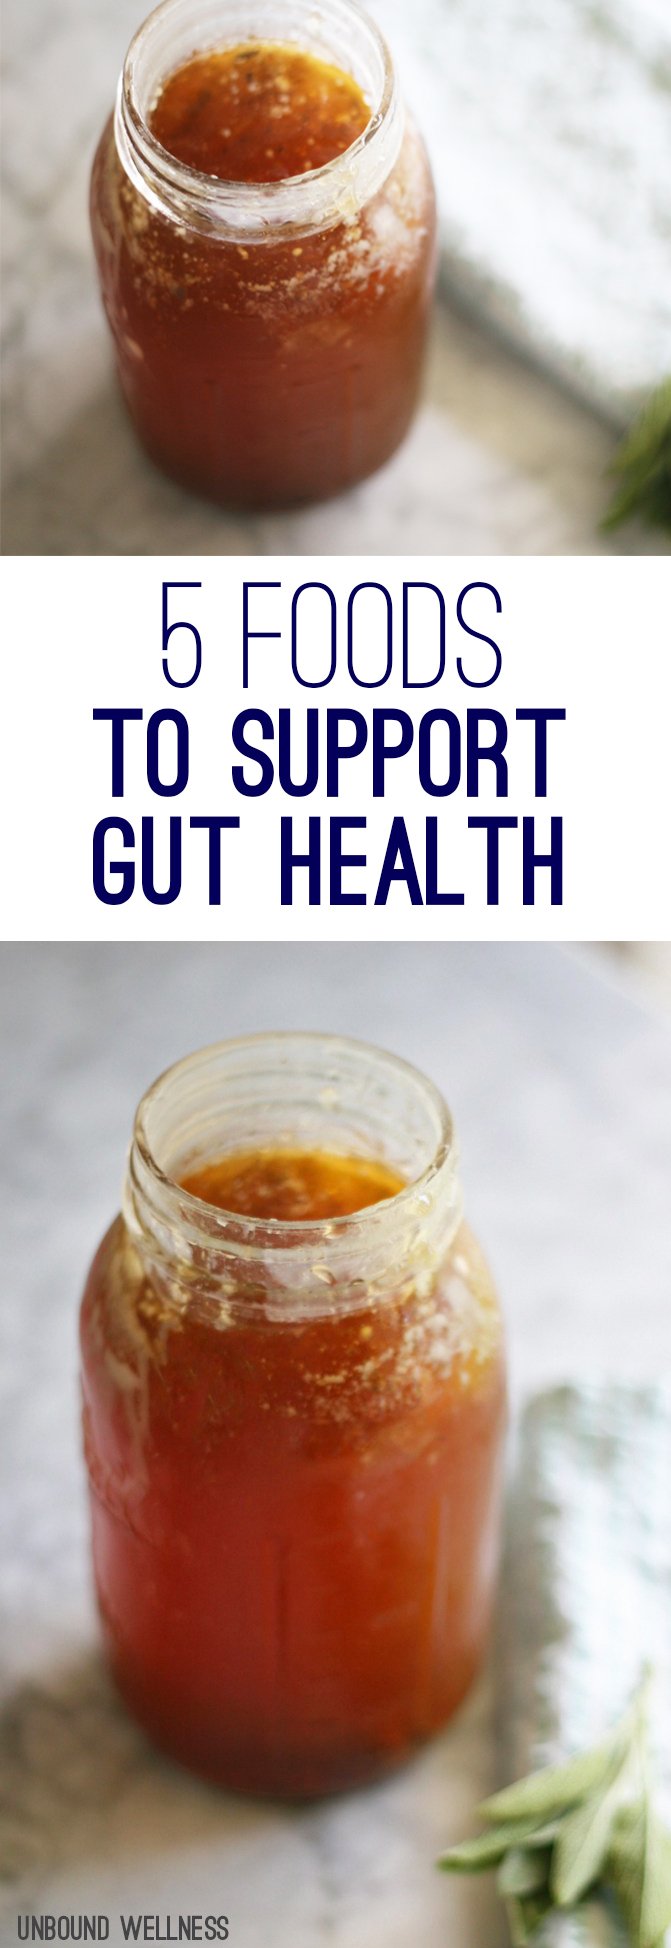 5 Foods to Support Gut Health